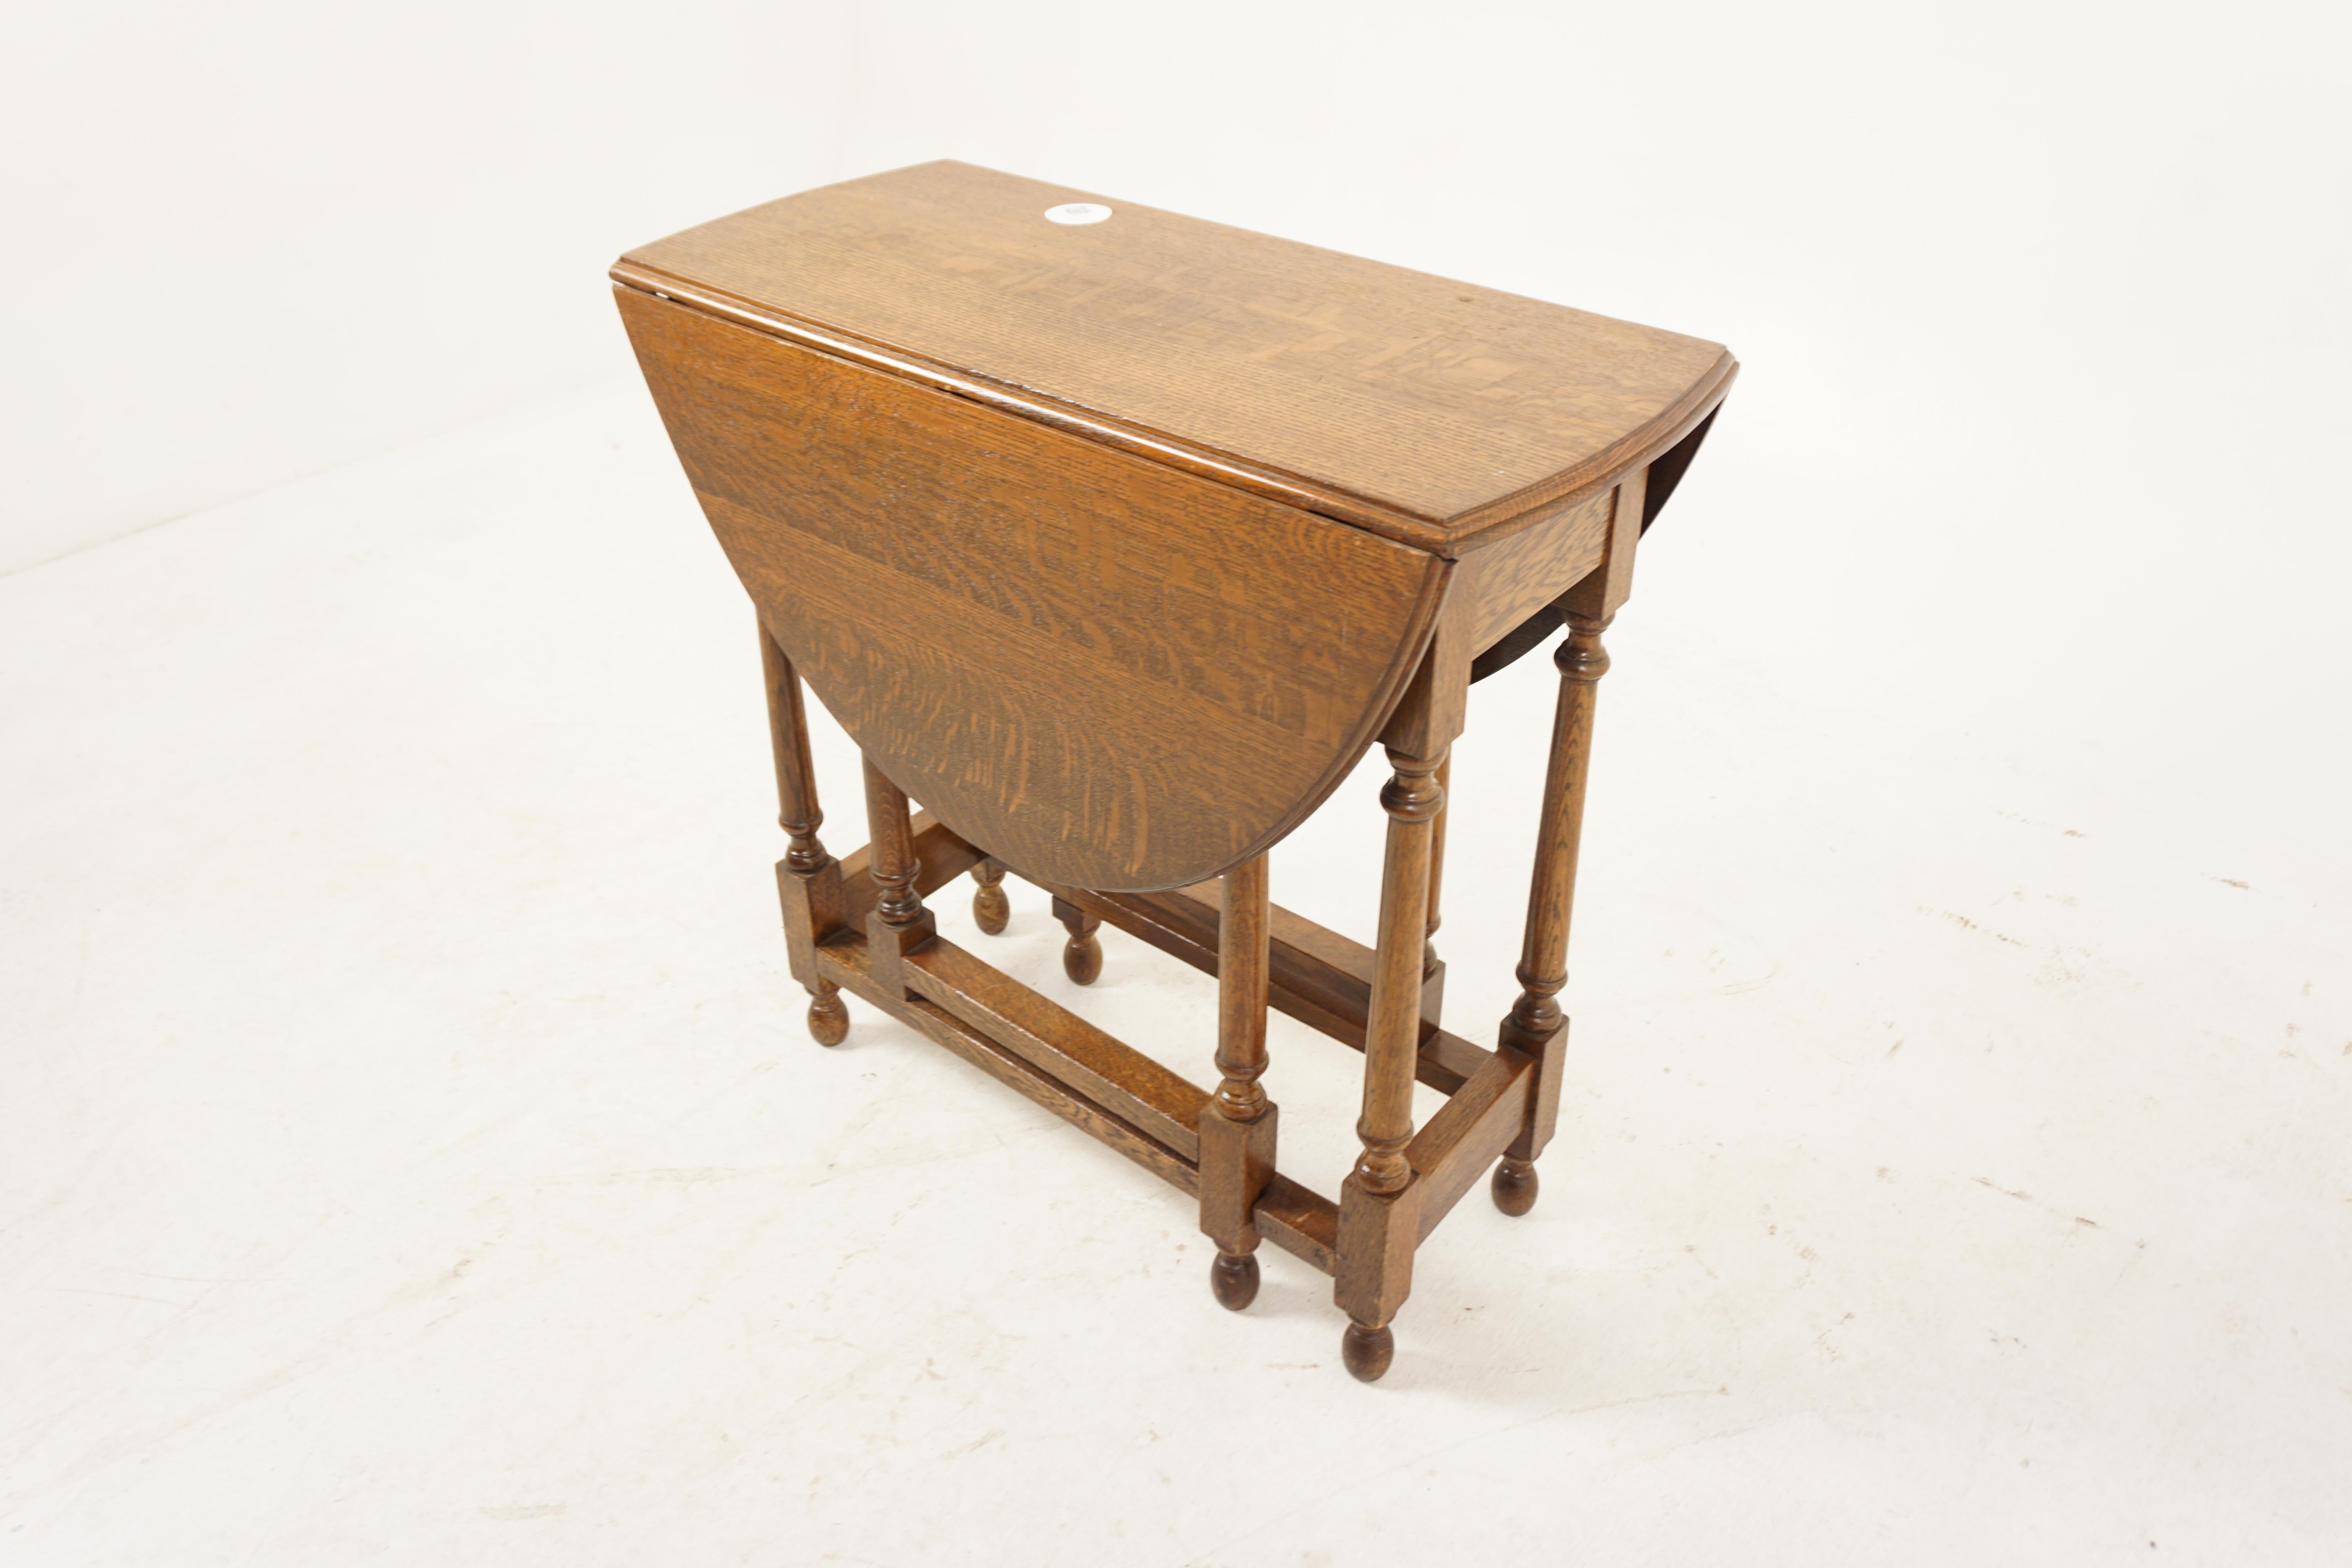 Antique Oak Table, Small Tiger Oak Gateleg Drop Leaf End Table, Antique Furniture, Scotland 1930, H1115

+ Scotland 1930
+ Solid Tiger Oak
+ Original Finish
+ Rectangular moulded top with rounded ends
+ Pair of leaves on the sides
+ Standing